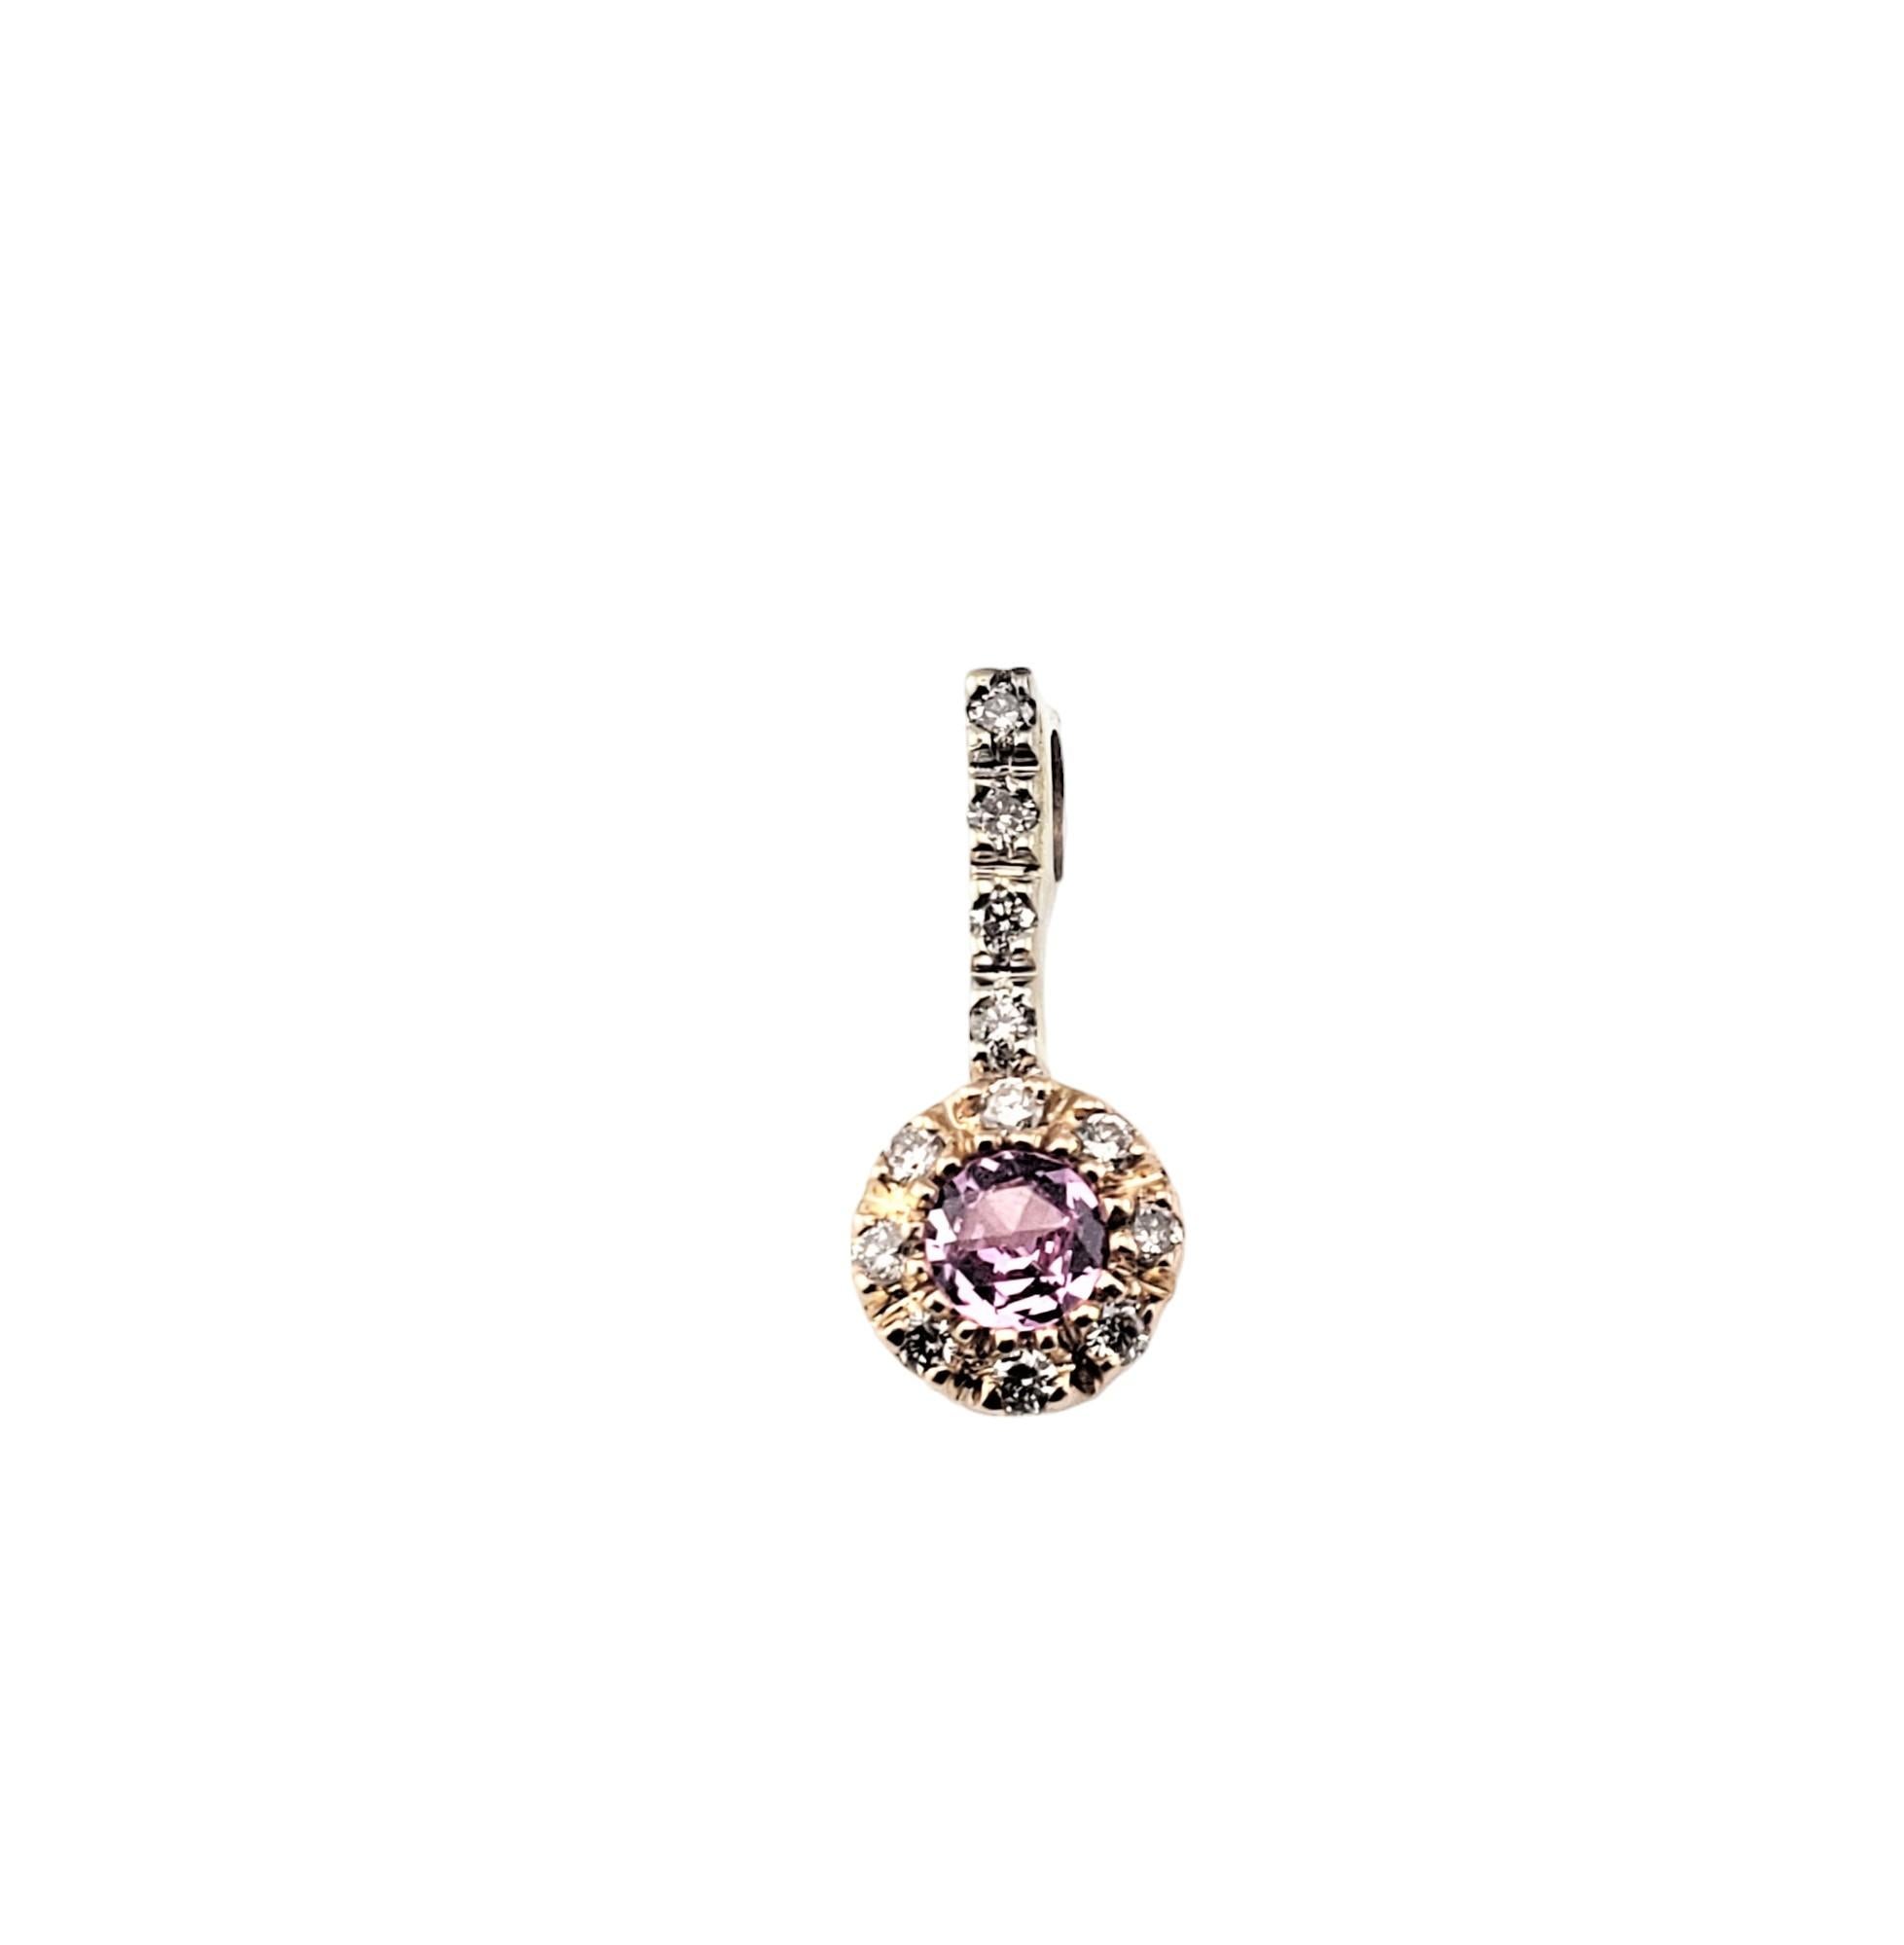 14 Karat Yellow and White Gold Pink Sapphire and Diamond Pendant-

This sparkling pendant features one pink sapphire (.10 ct.) and 12 round brilliant cut diamonds set in 14K yellow and white gold.  

Matching earrings: RL-0007993

Approximate total